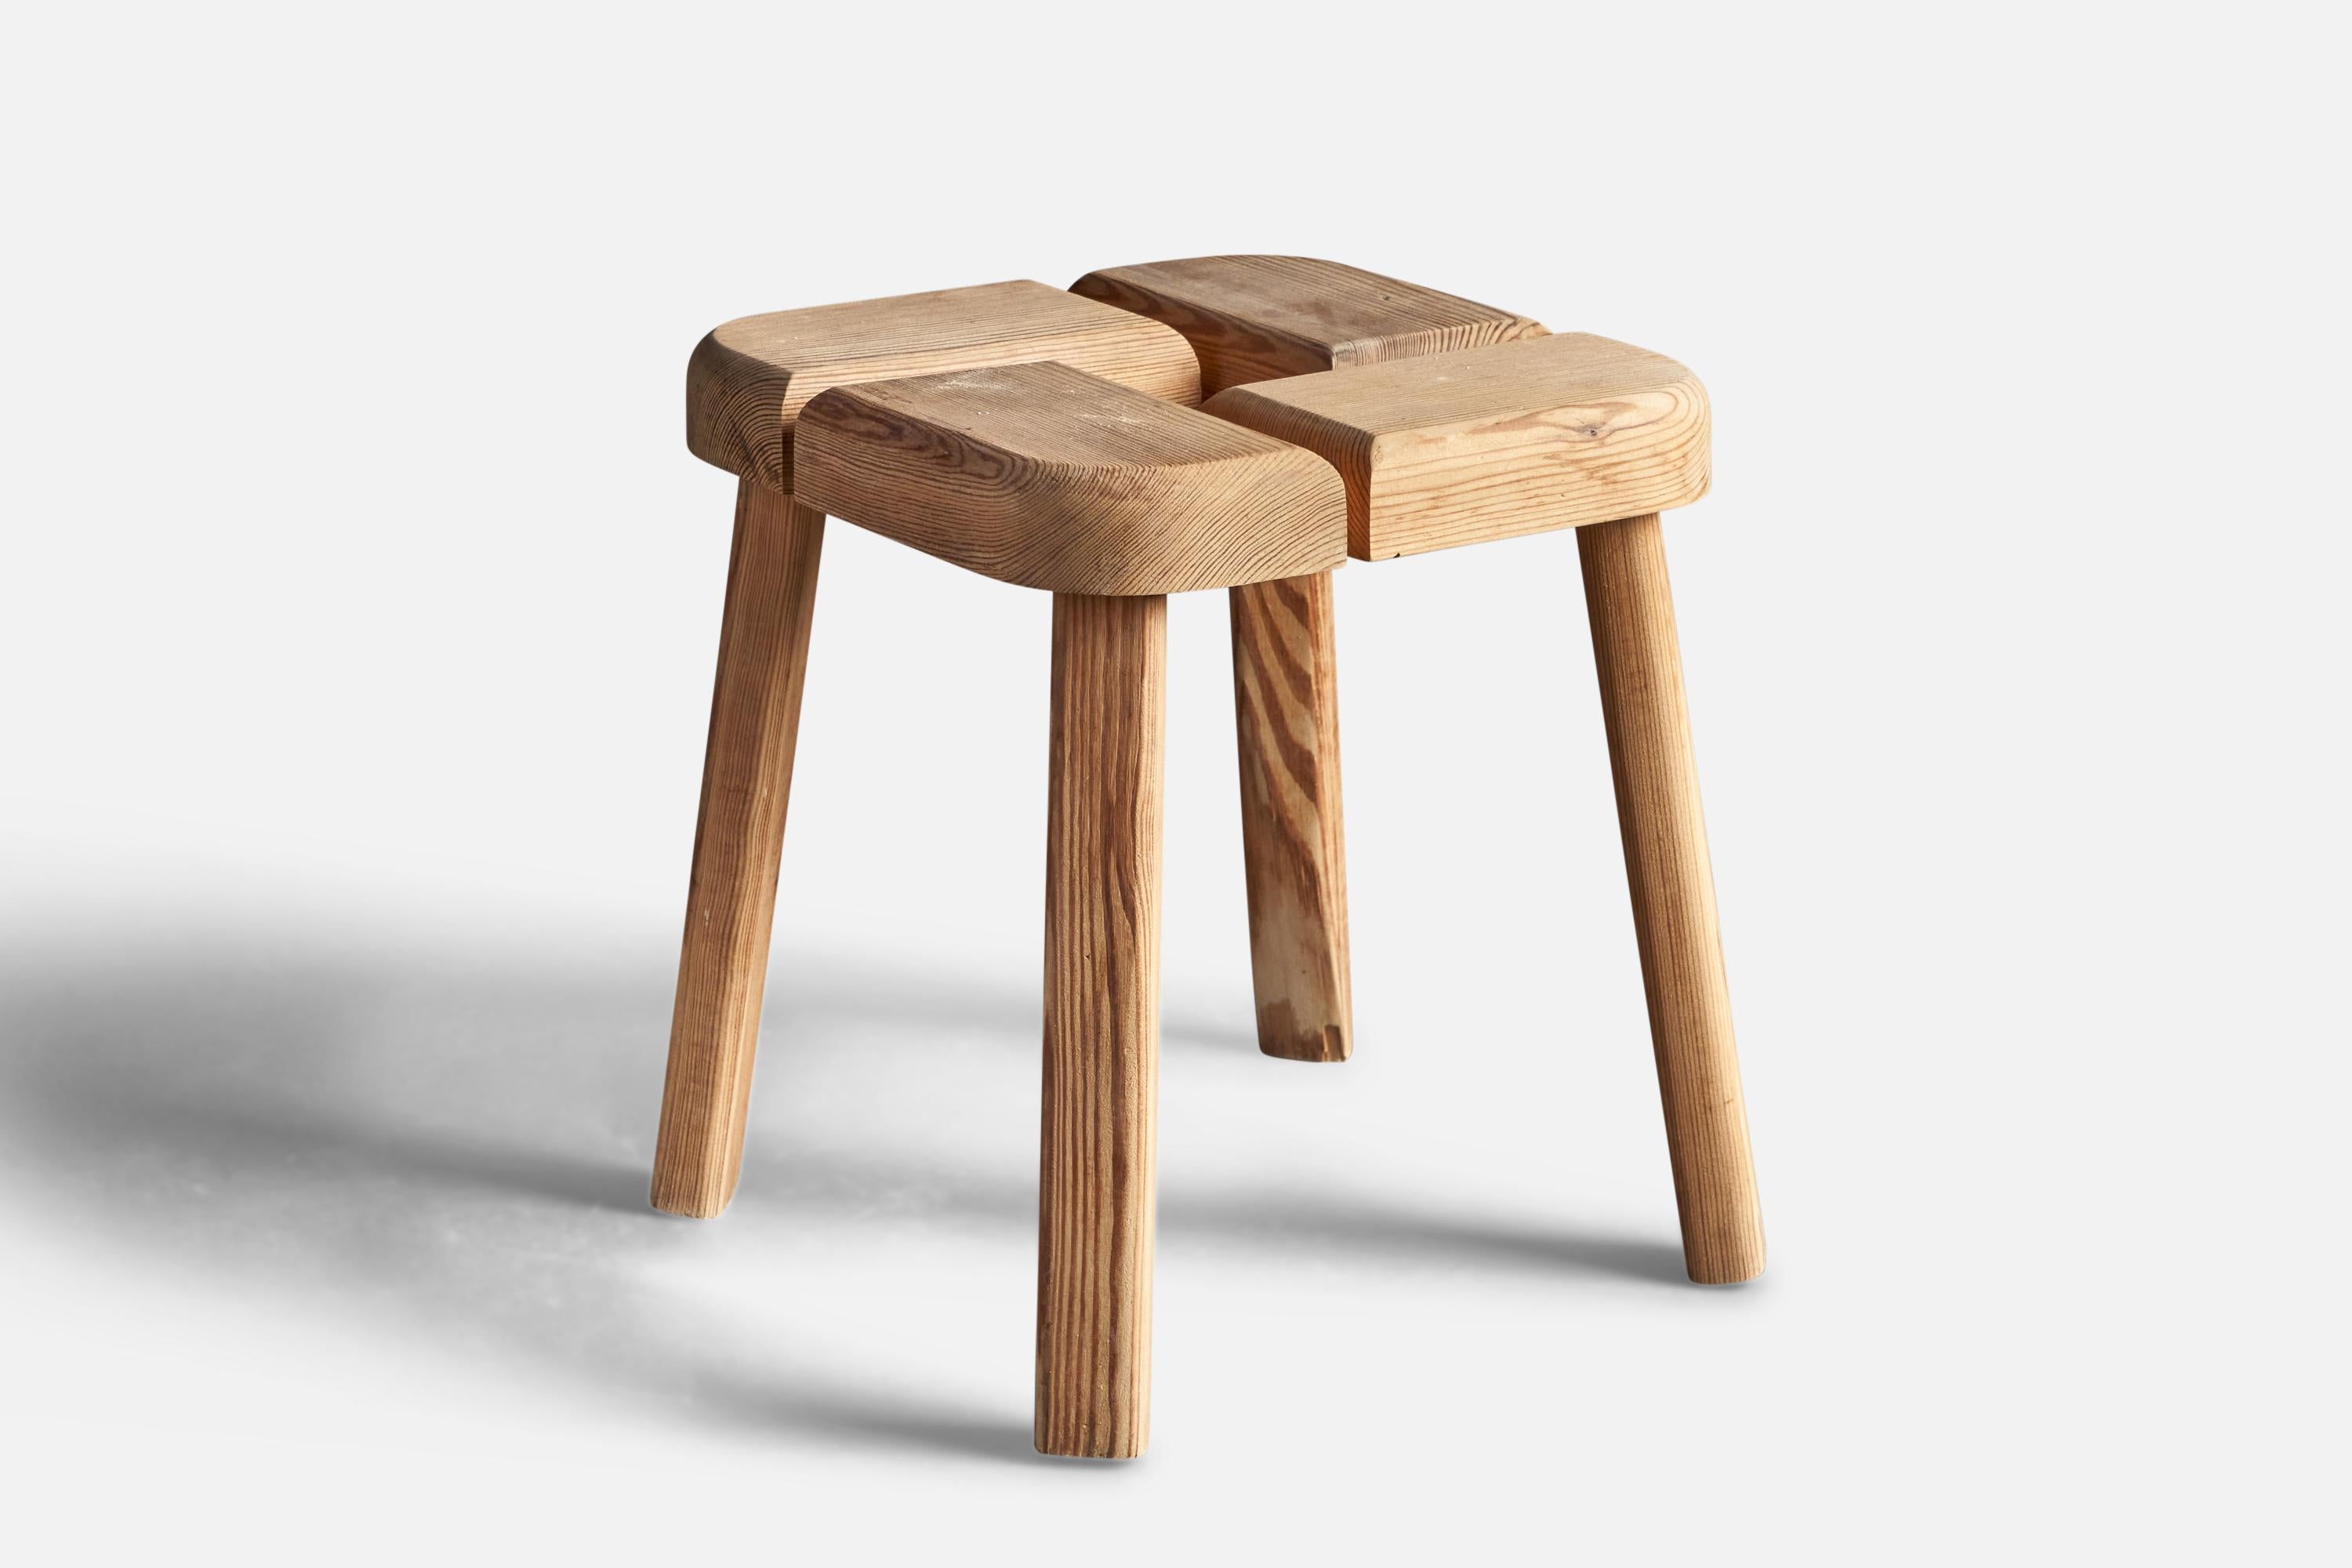 A solid pine stool, design and production attributed to Olof Ottelin, Finland, 1970s.